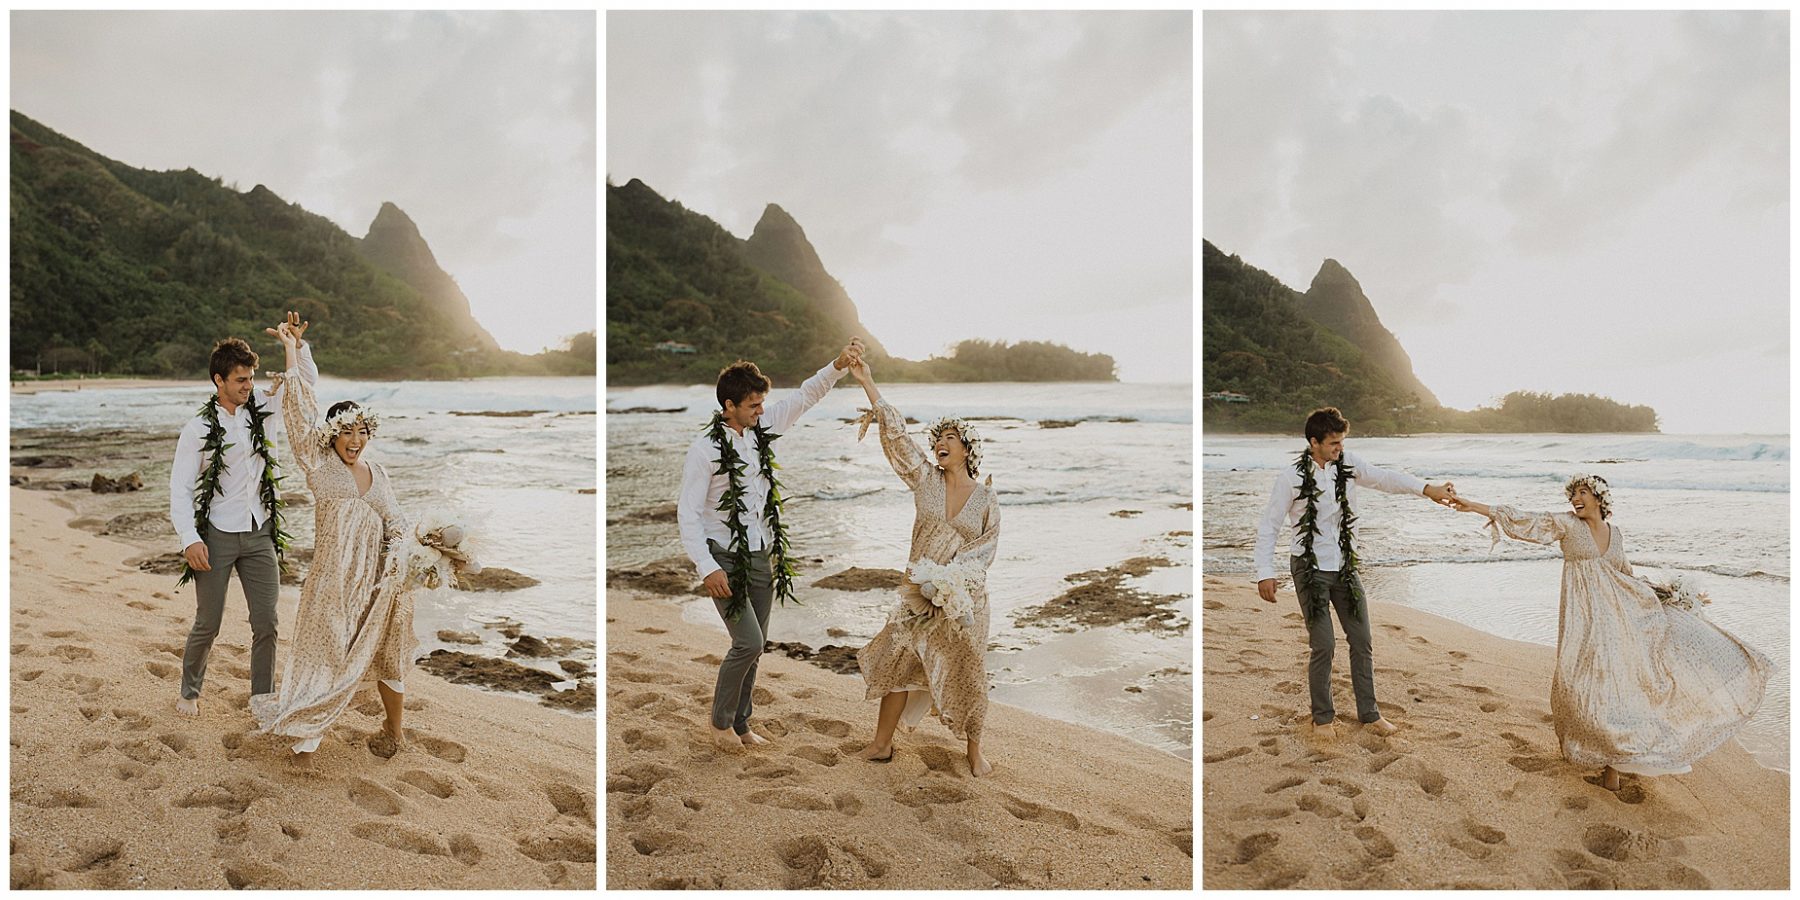 bride dressed in a gold dress holding hands with her groom, dressed in Hawaiian attire during their elopement on the beach of Kauai